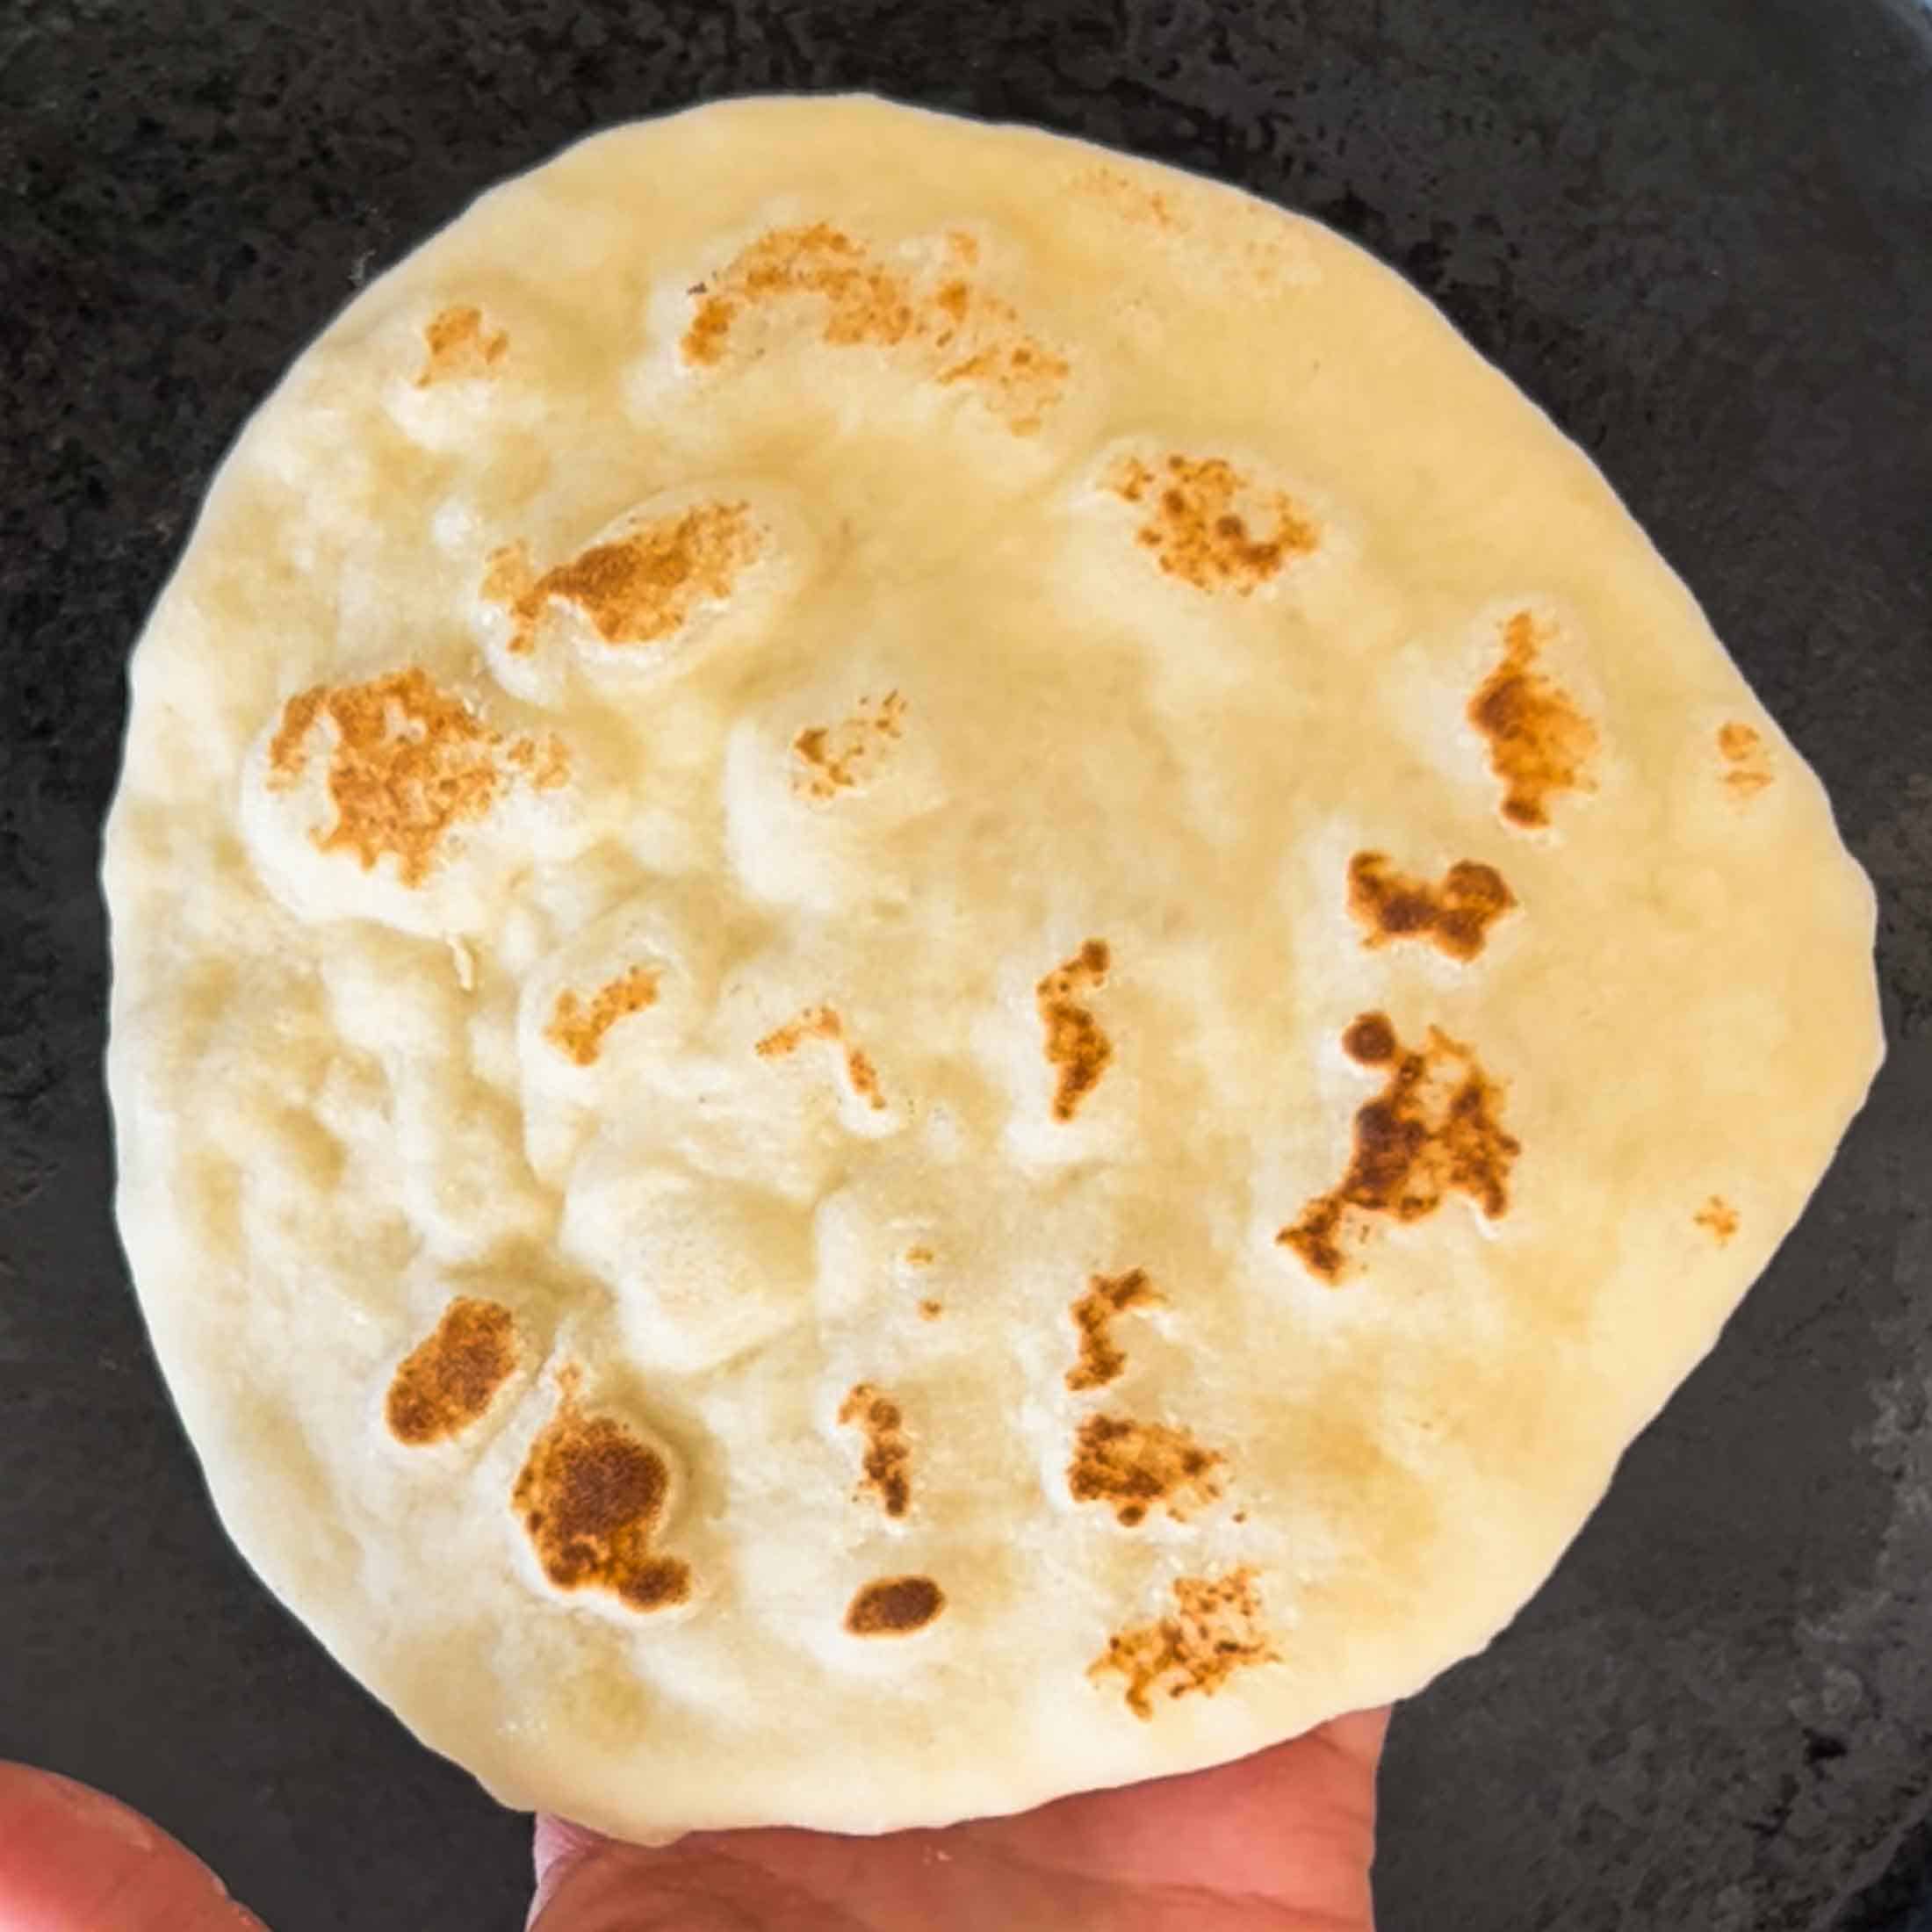 The underside of a freshly cooked sourdough discard naan bread showing golden brown bubbles.